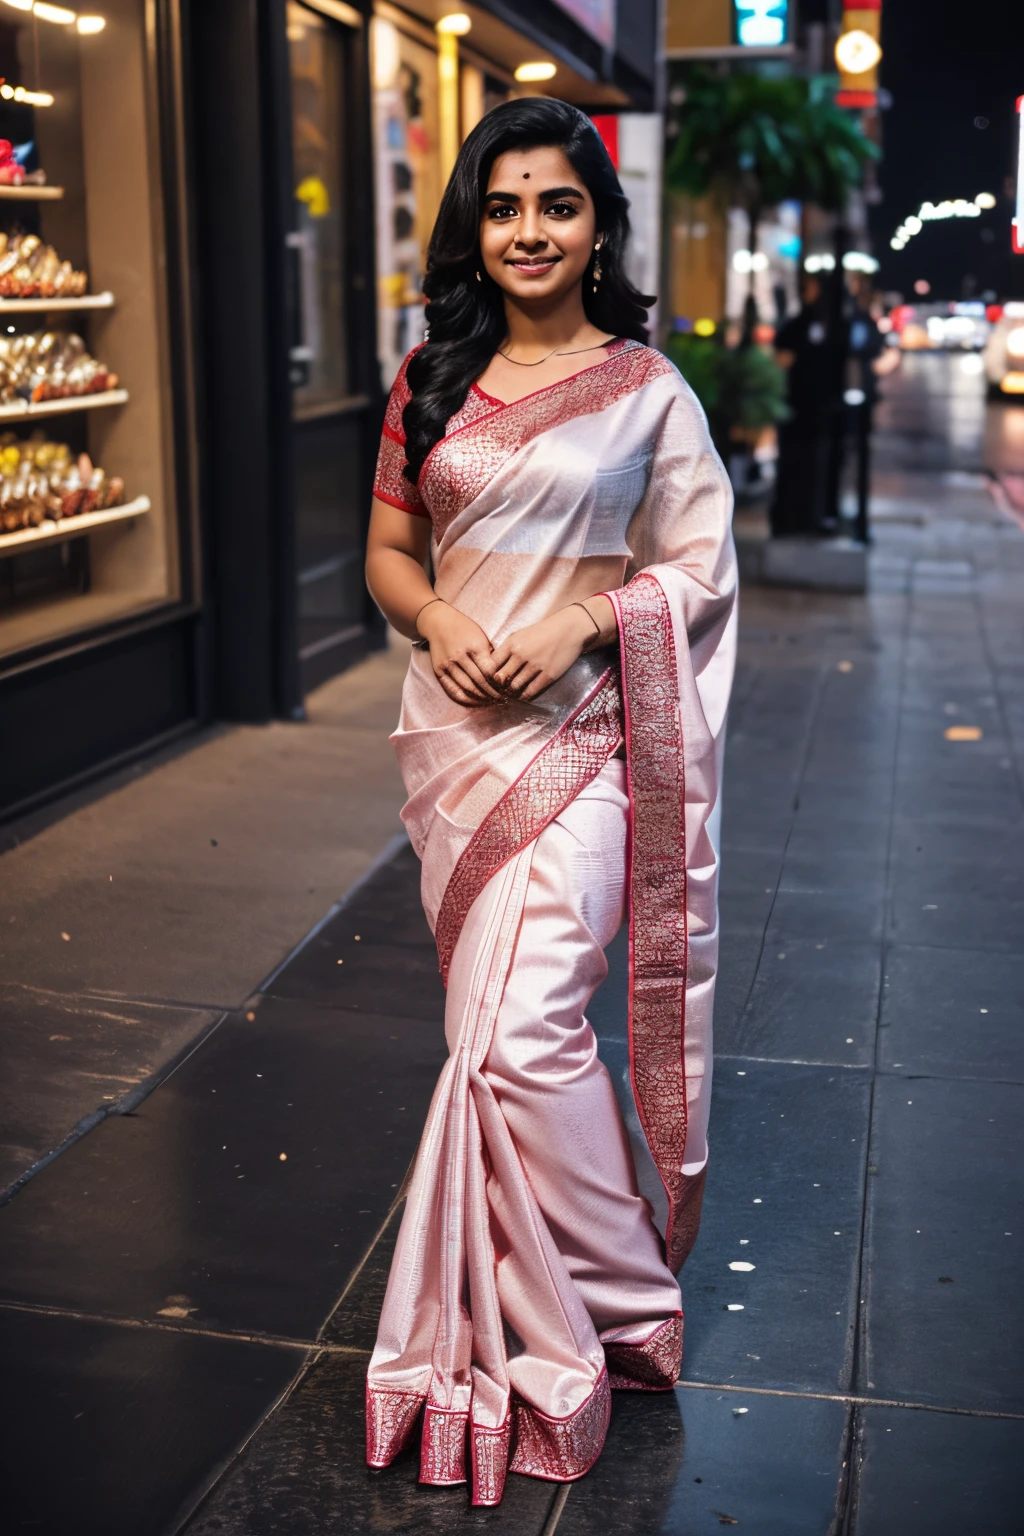 (masterpiece, high quality, HD, 32k, 64k), portrait of 25 year old extremely beautiful Tamil girl, (cute smile:0.6), (look at viewer), (fully clothed:1.6 floral saree, designer blouse, petticoat), (leaning:1.6 against the wall), inside the living room, soft colors, bright lighting, cinematic effects, backlit, shining skin, very long black hair, (arms crossed:1.6), (bangles, thin necklace, ear stud, wrist watch), (extremely beautiful:1.2 face & ears & cheeks & nose & lips & neck & hands & arms & 5 fingers & body parts & skin & curves), (background:1.6 wallpapers, tube lights, ceiling fan, door, windows, sofa, showcase, TV ), (full body shot :1.6 from bottom)